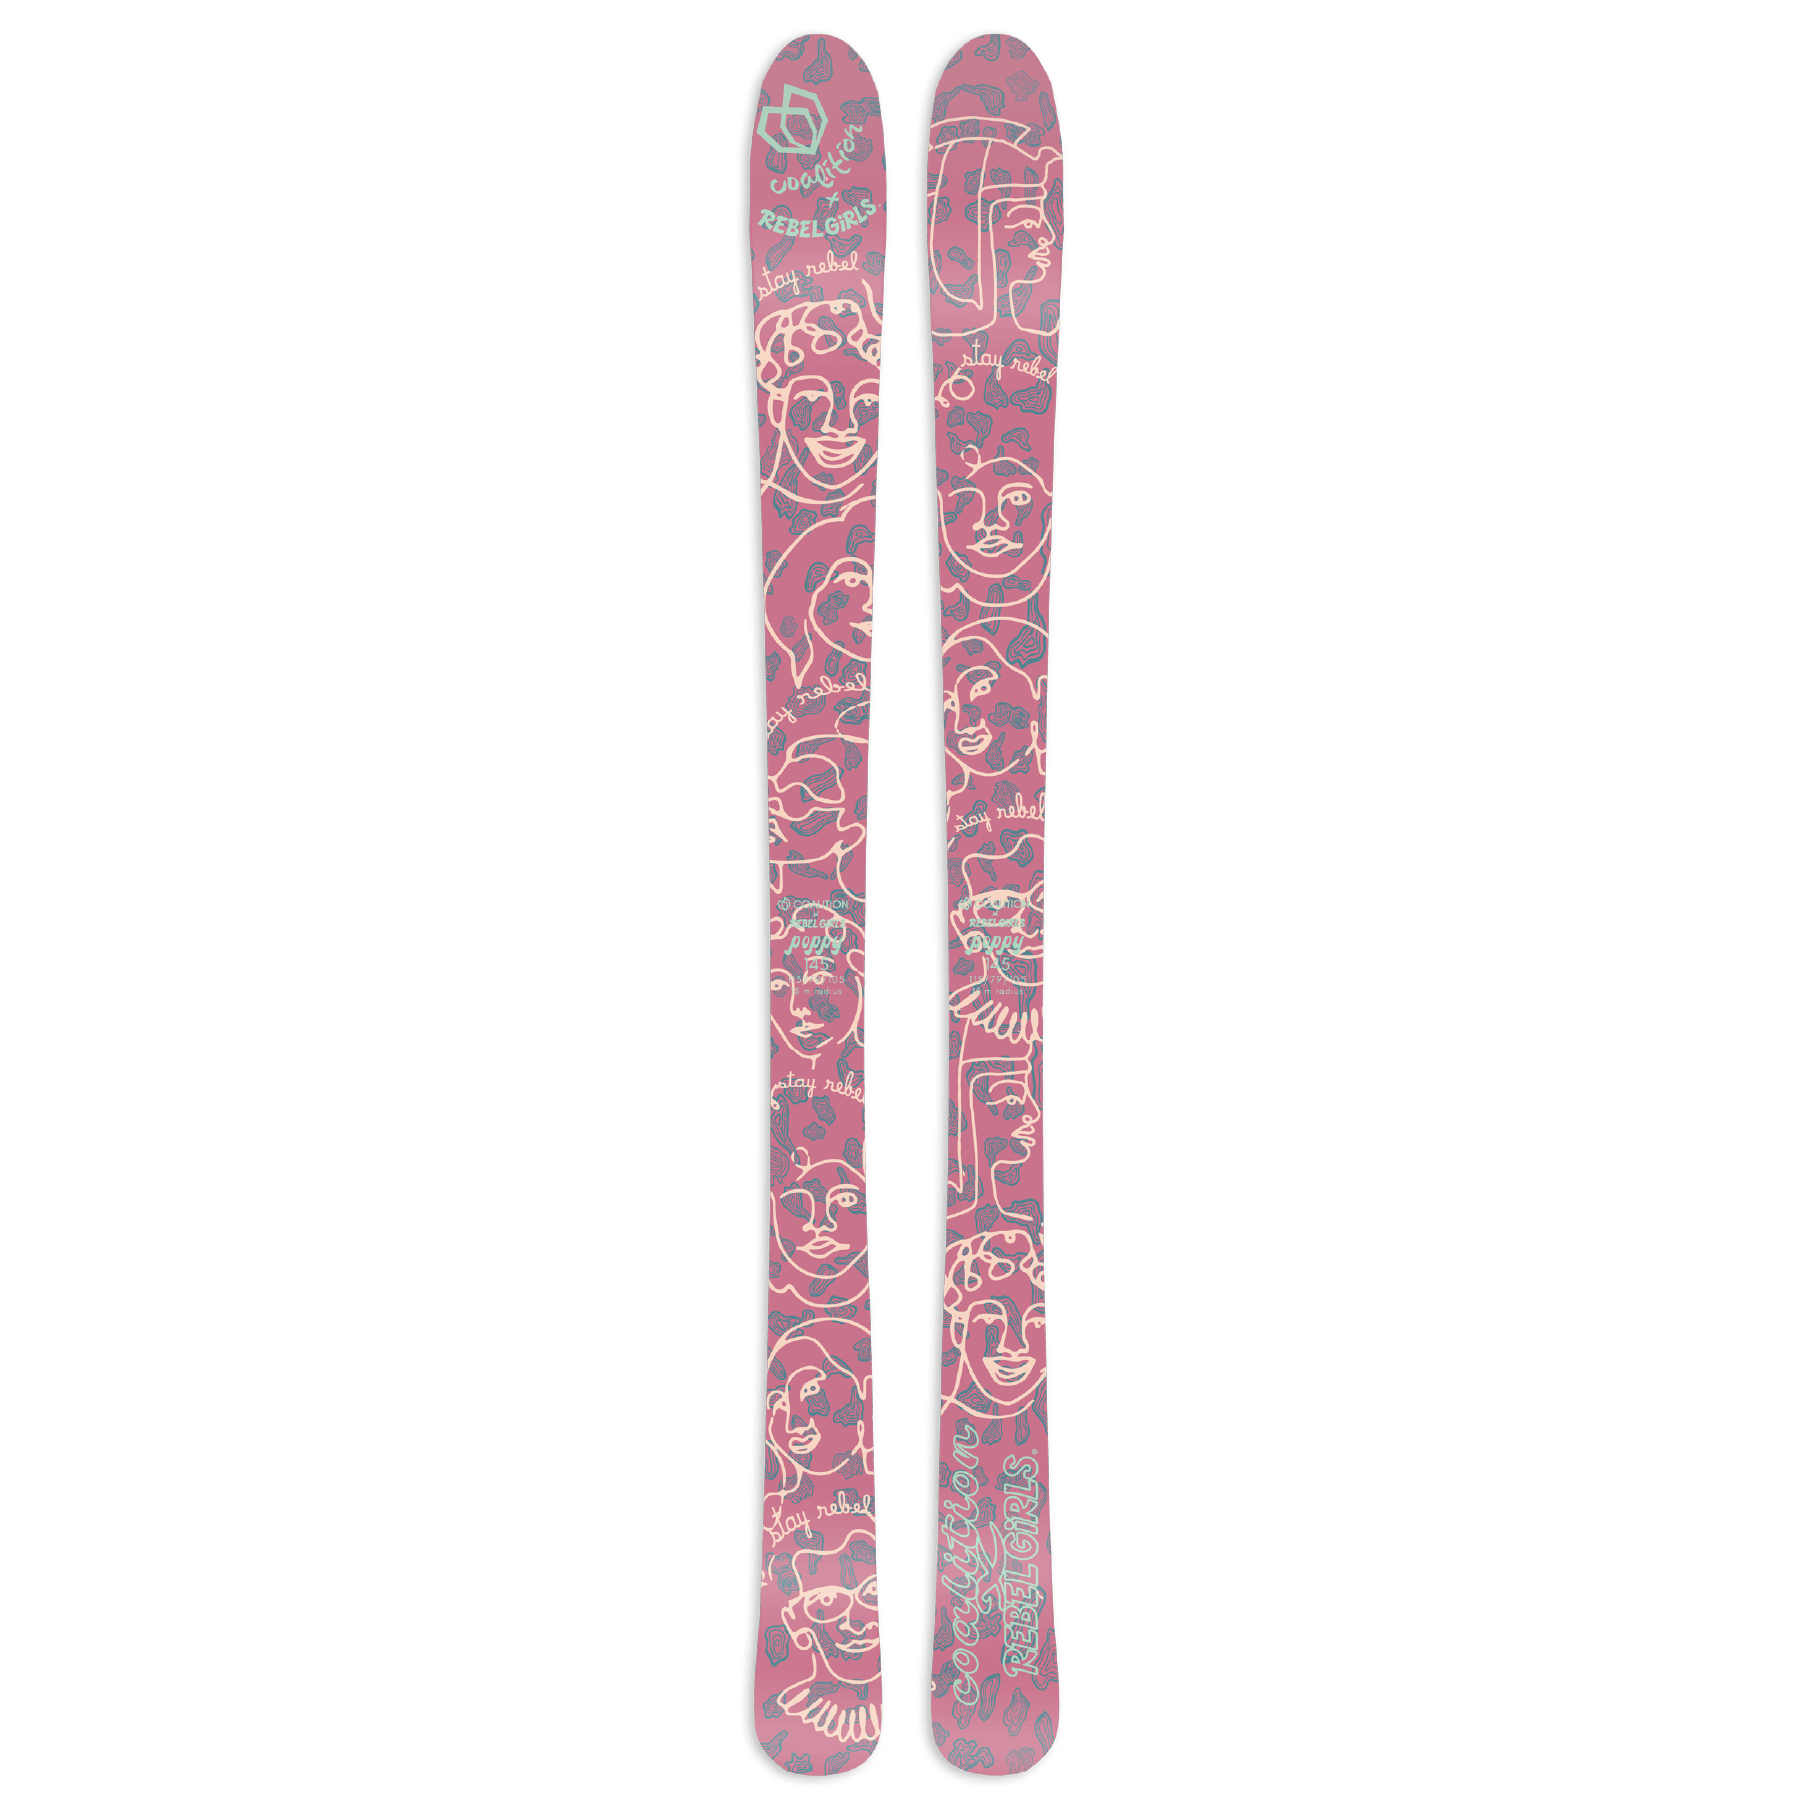 Sold out: “Poppy” Youth Ski by Coalition Snow